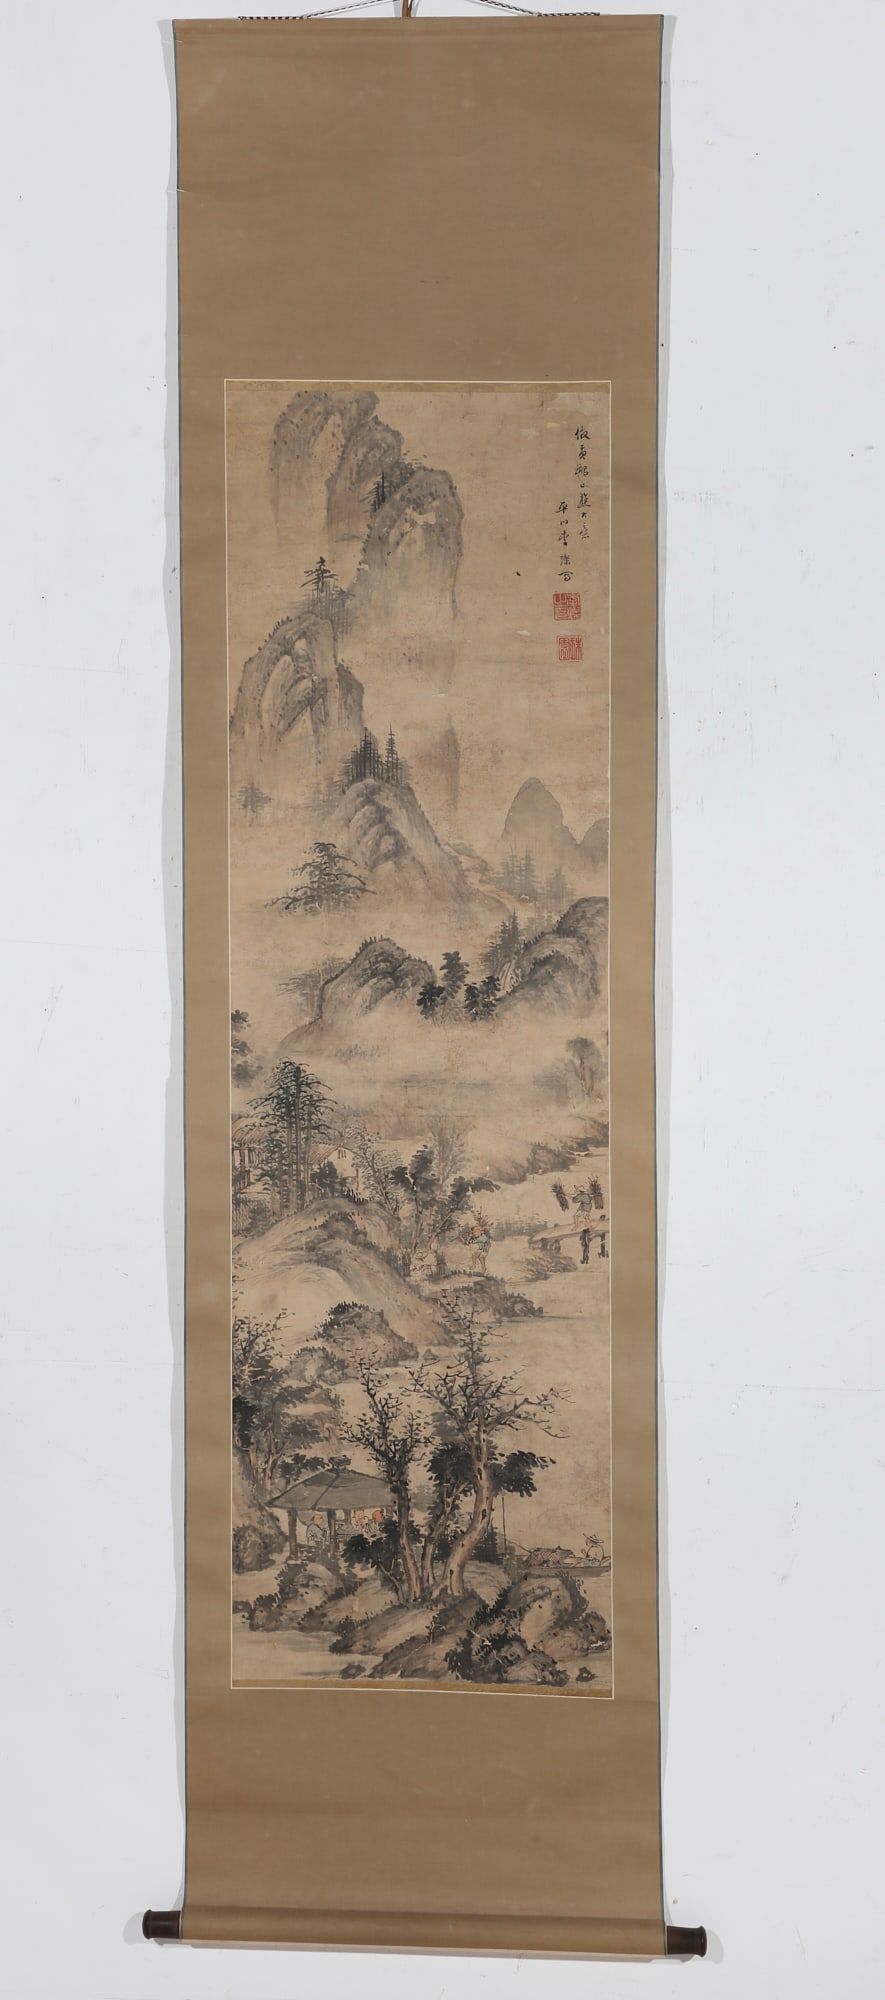 A CHINESE SCROLL PAINTING ATTRIBUTED 2fb337f